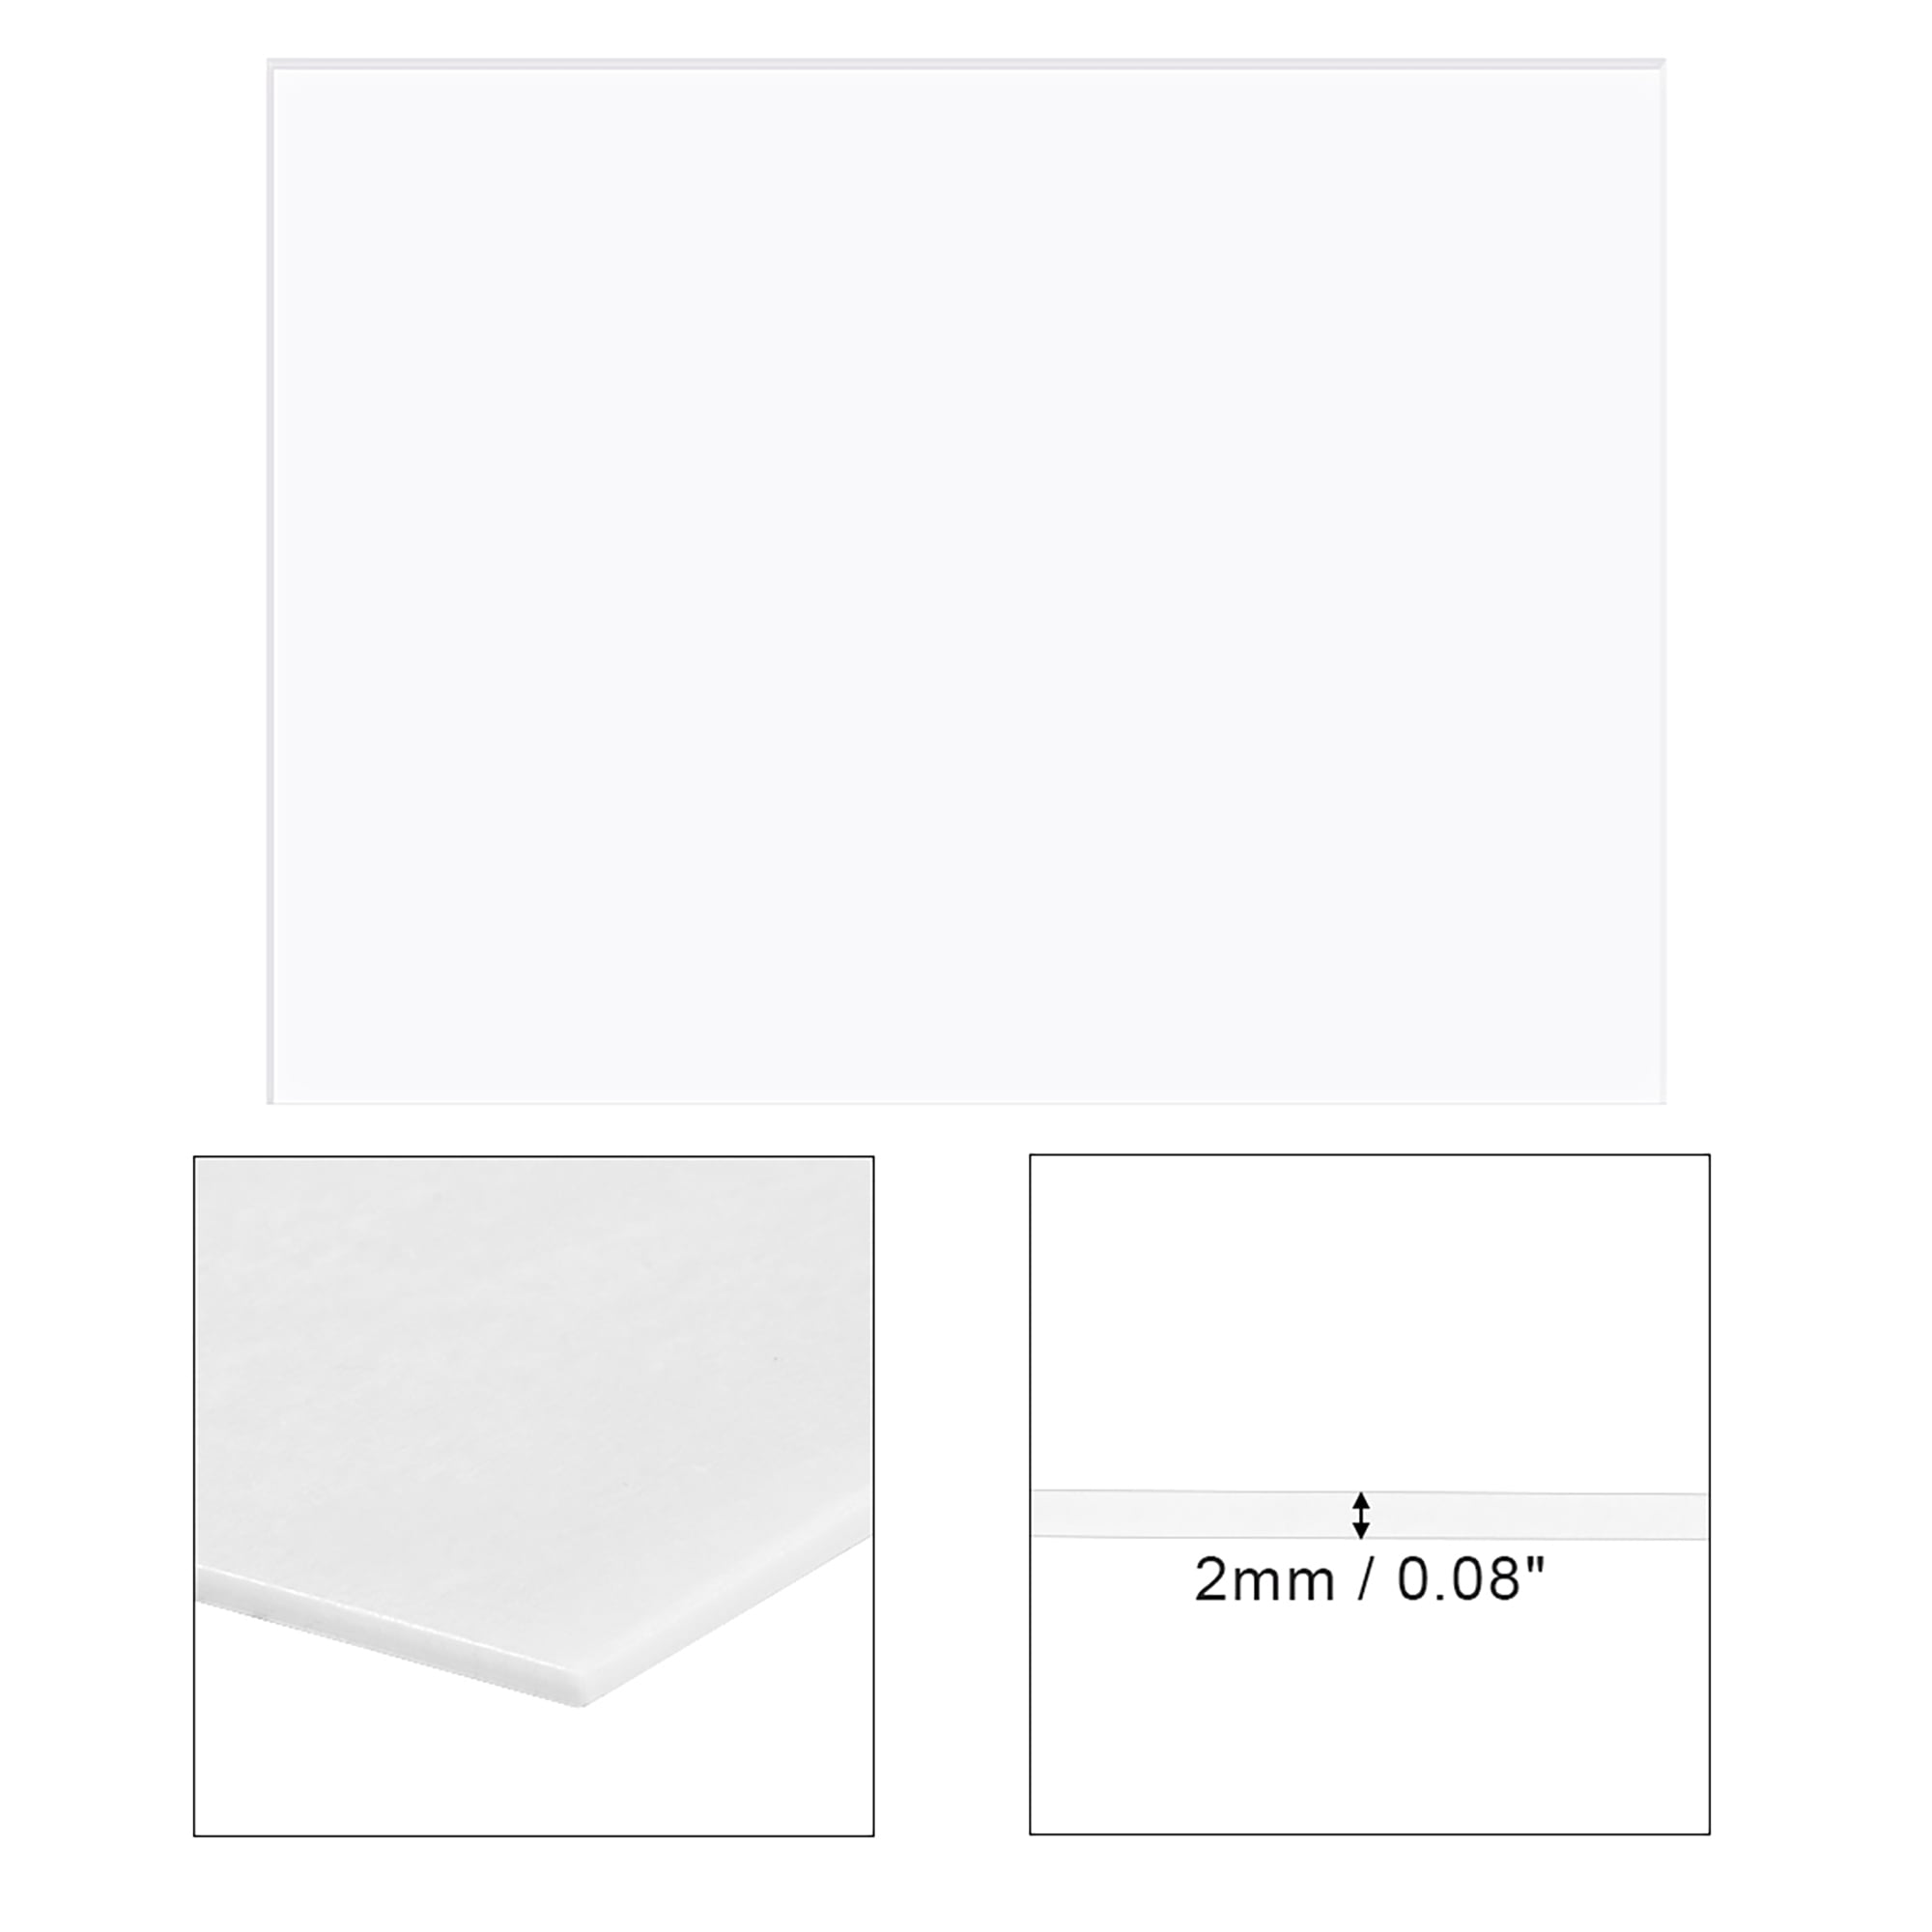 Details about   Acrylic Sheet,White,2mm Thick,25cm x 25cm,Plastic Board 